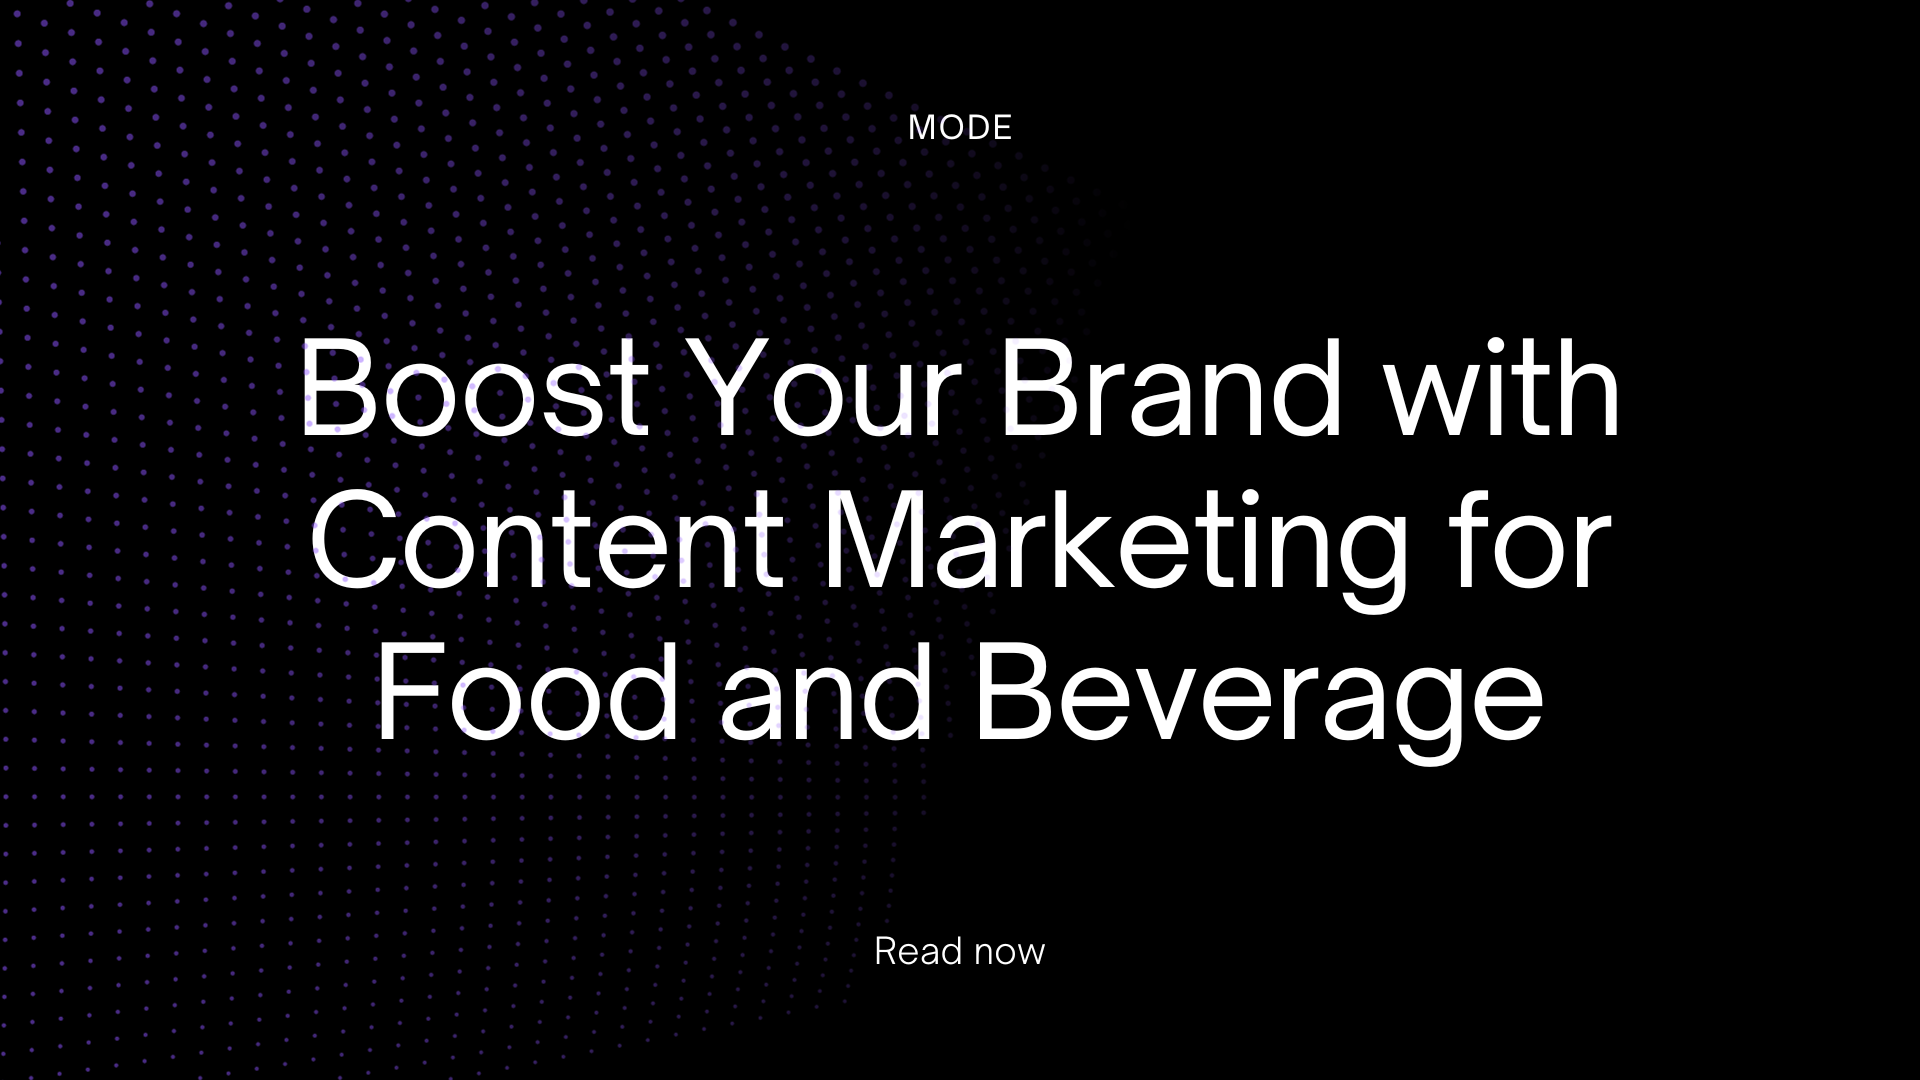 Boost Your Brand with Content Marketing for Food and Beverage